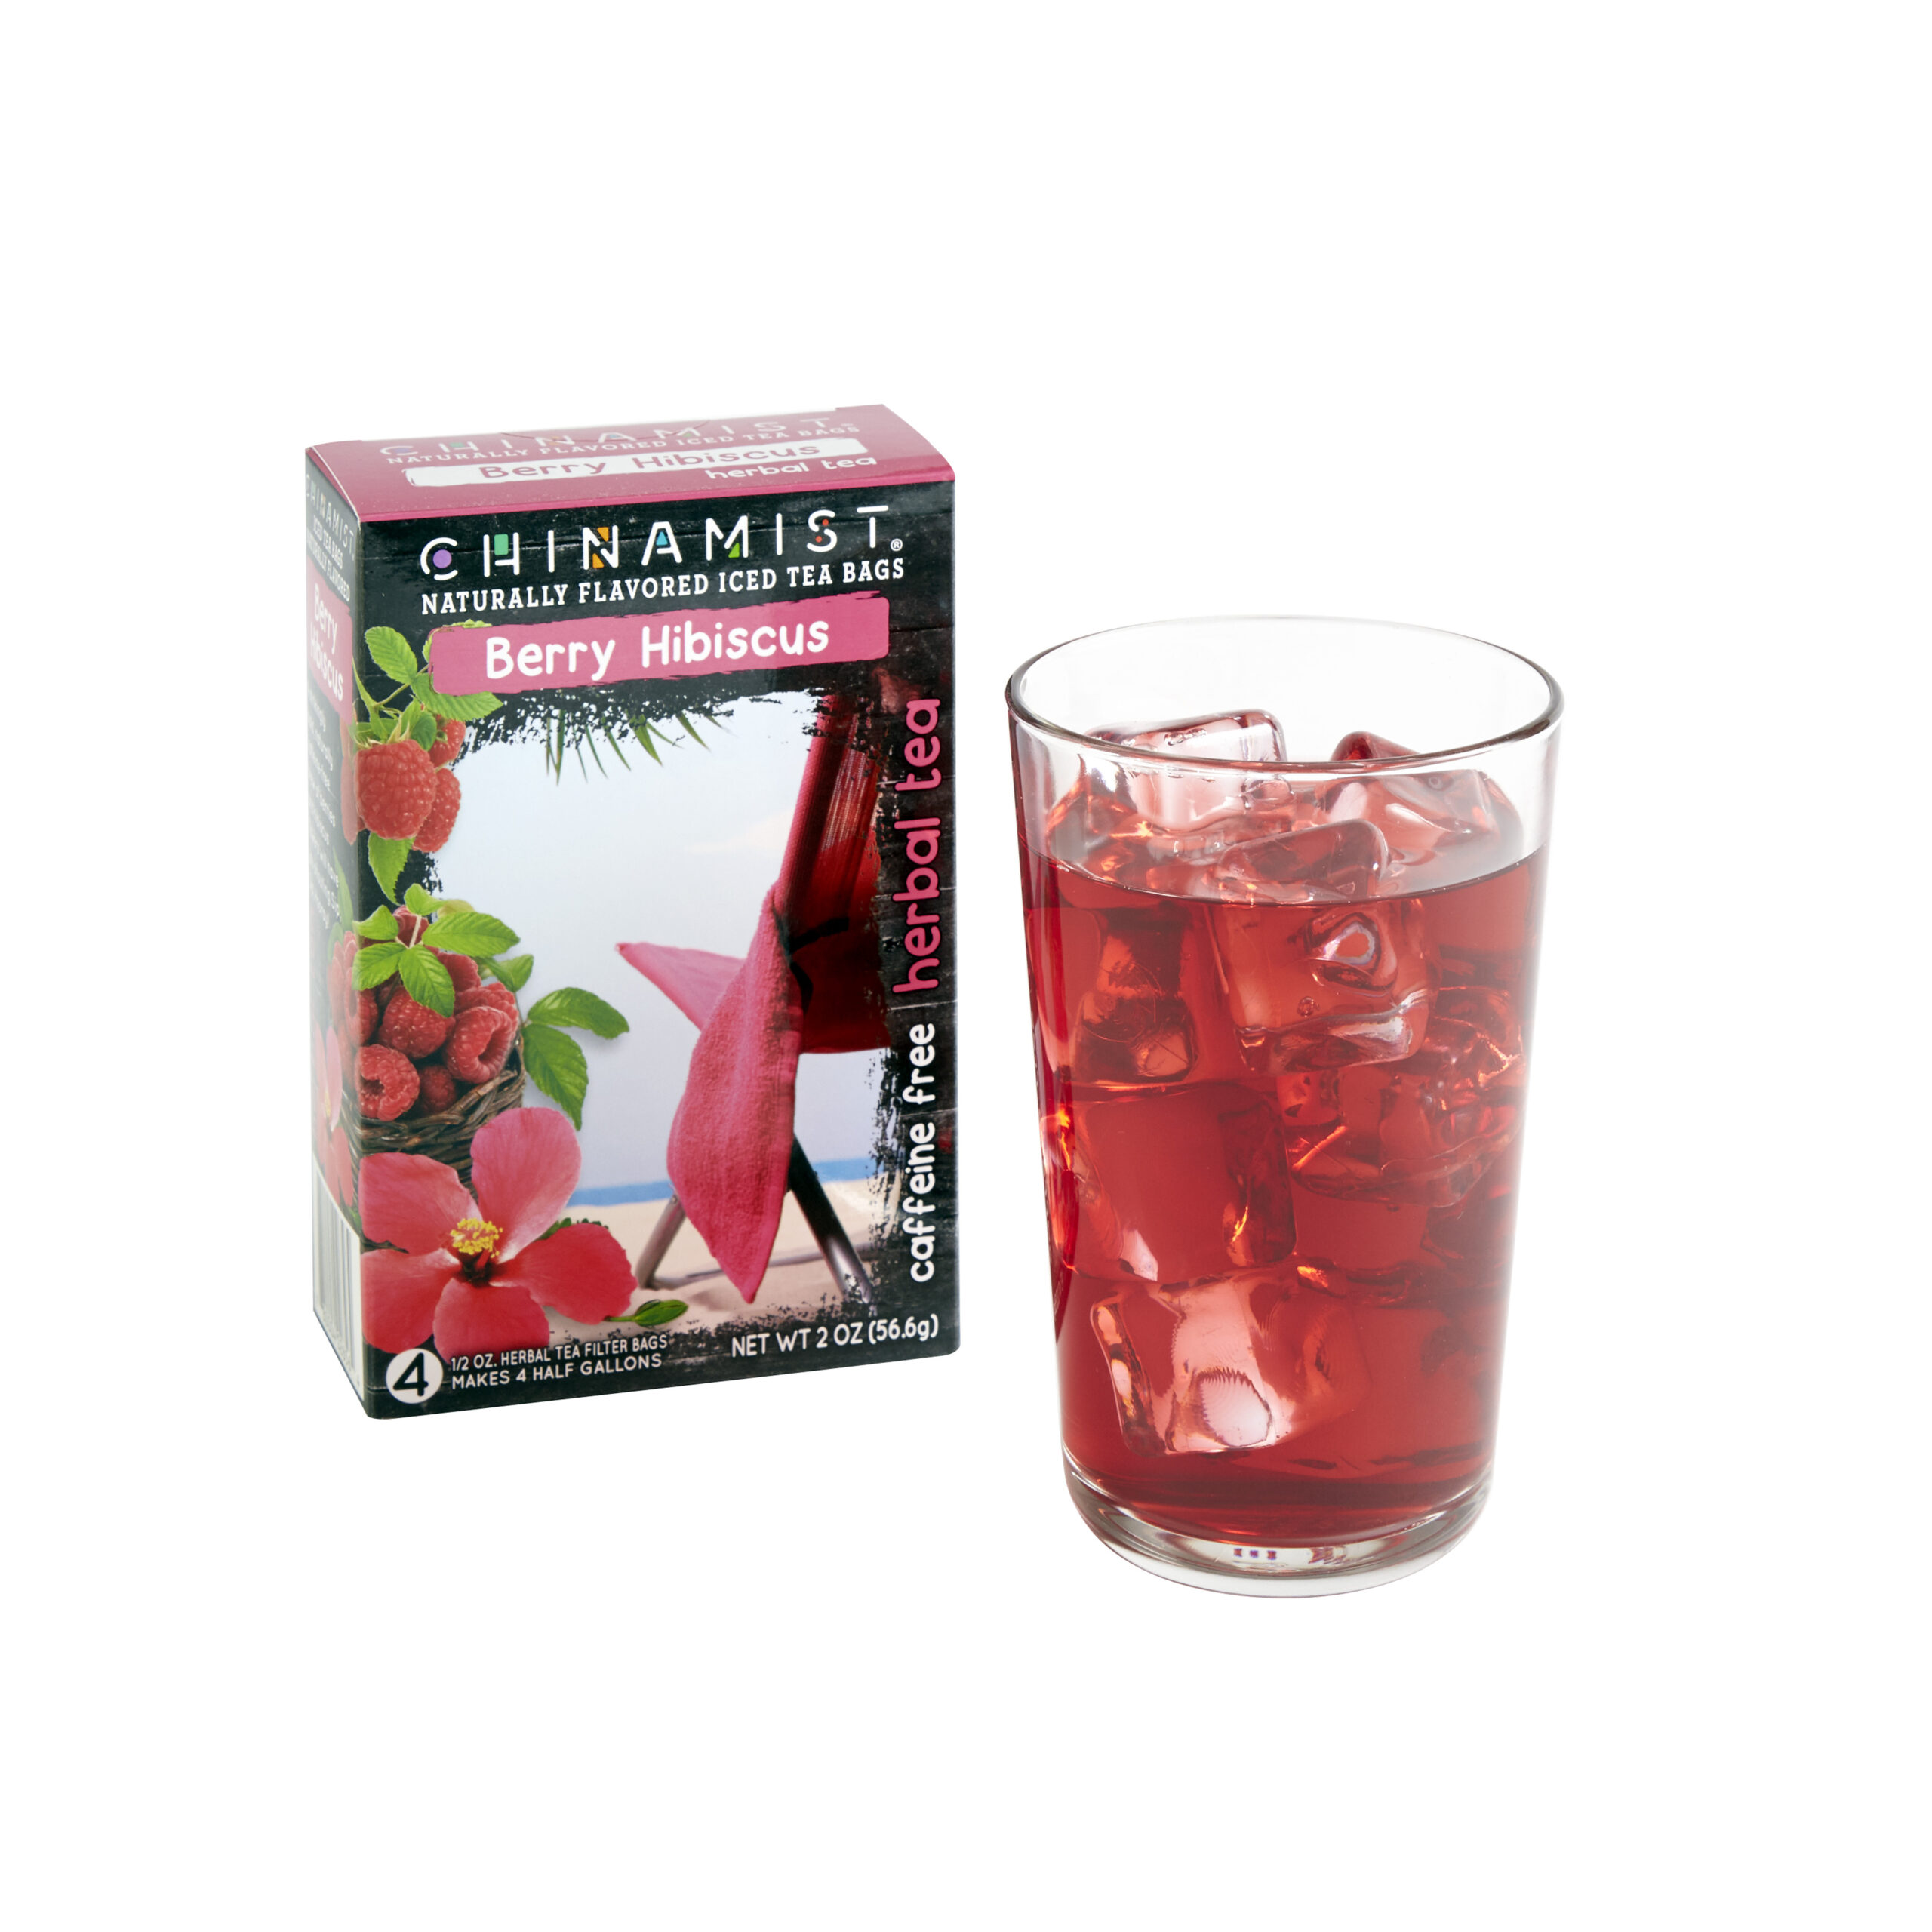 Naturally Flavored Berry Hibiscus Herbal Iced Tea - Filter Bags 